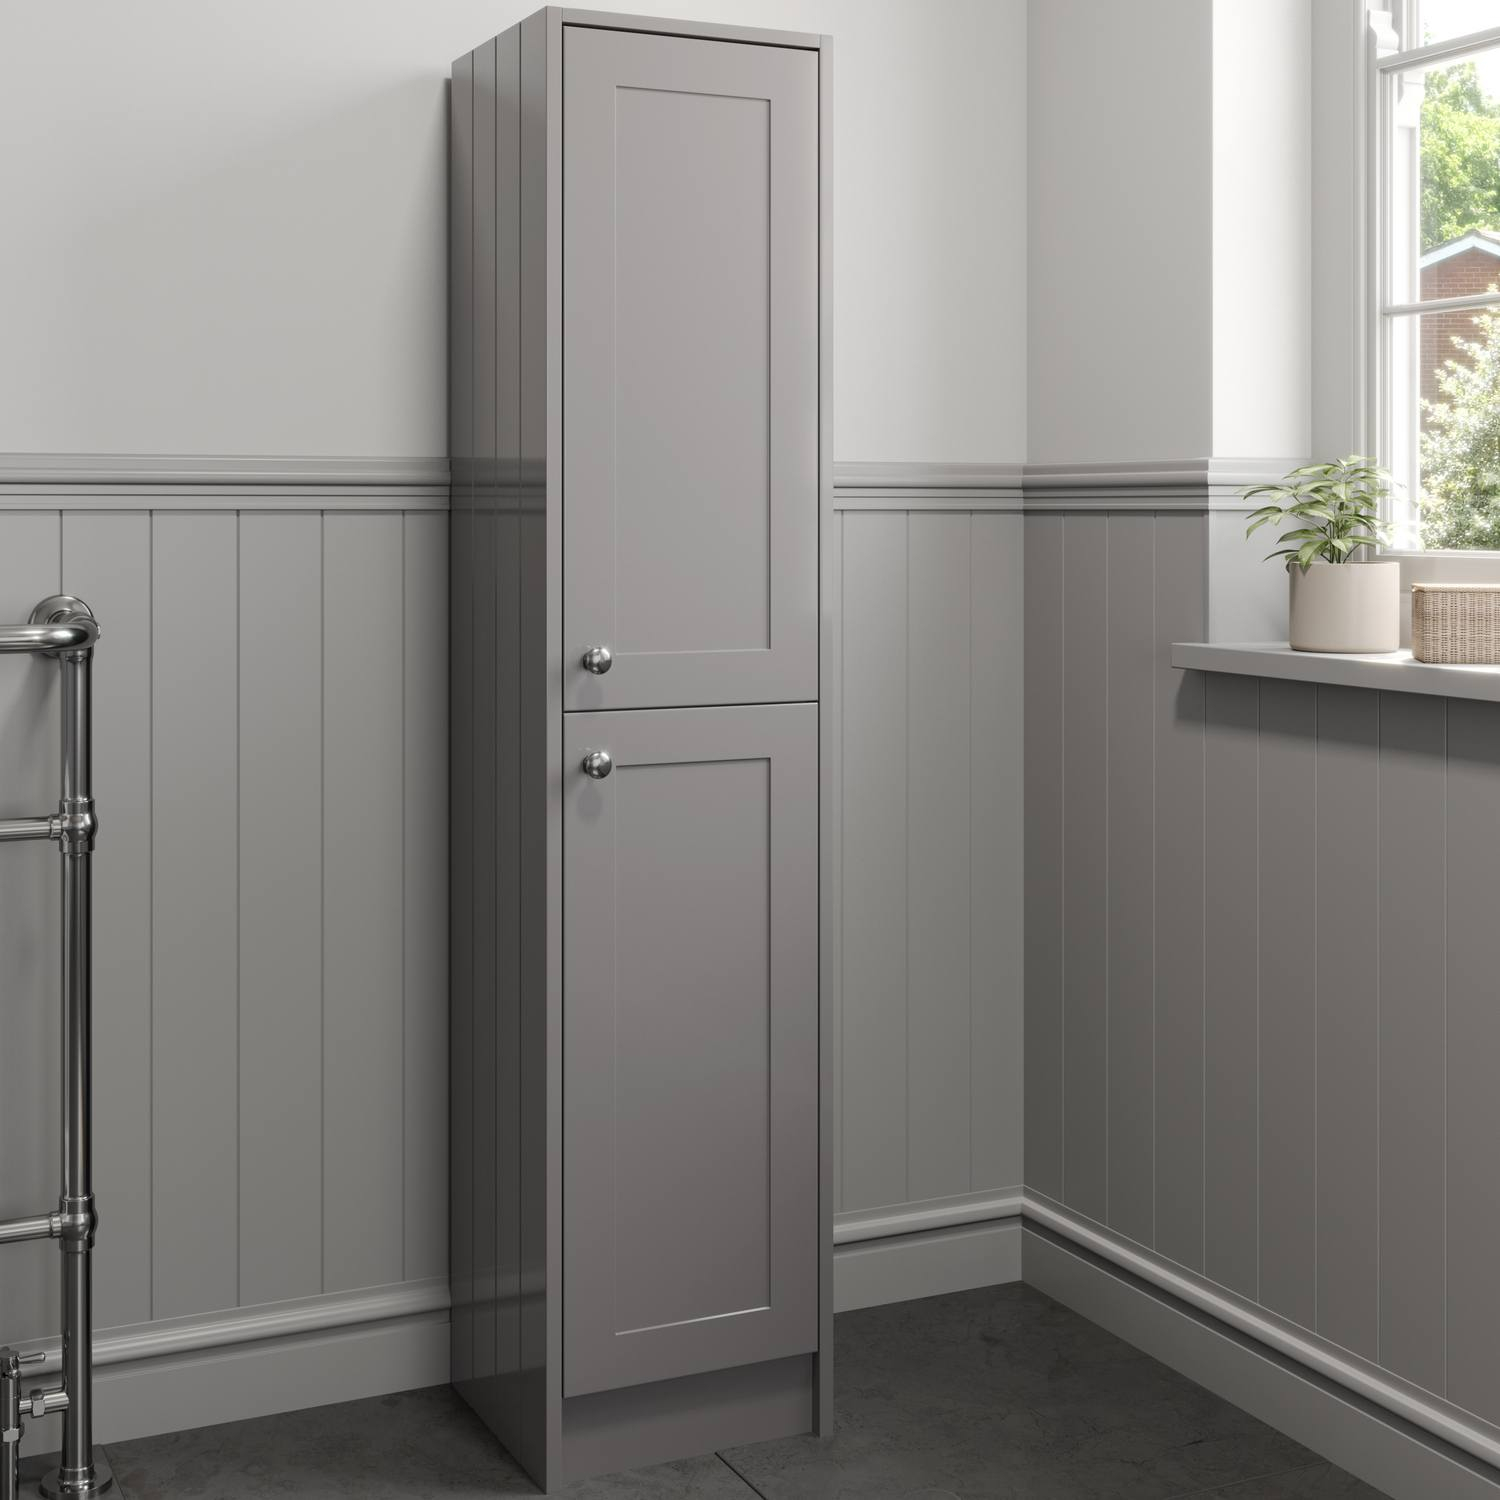 Details About 1600mm Tall Bathroom Storage Cabinet Cupboard Floorstanding Grey Traditional for dimensions 1500 X 1500